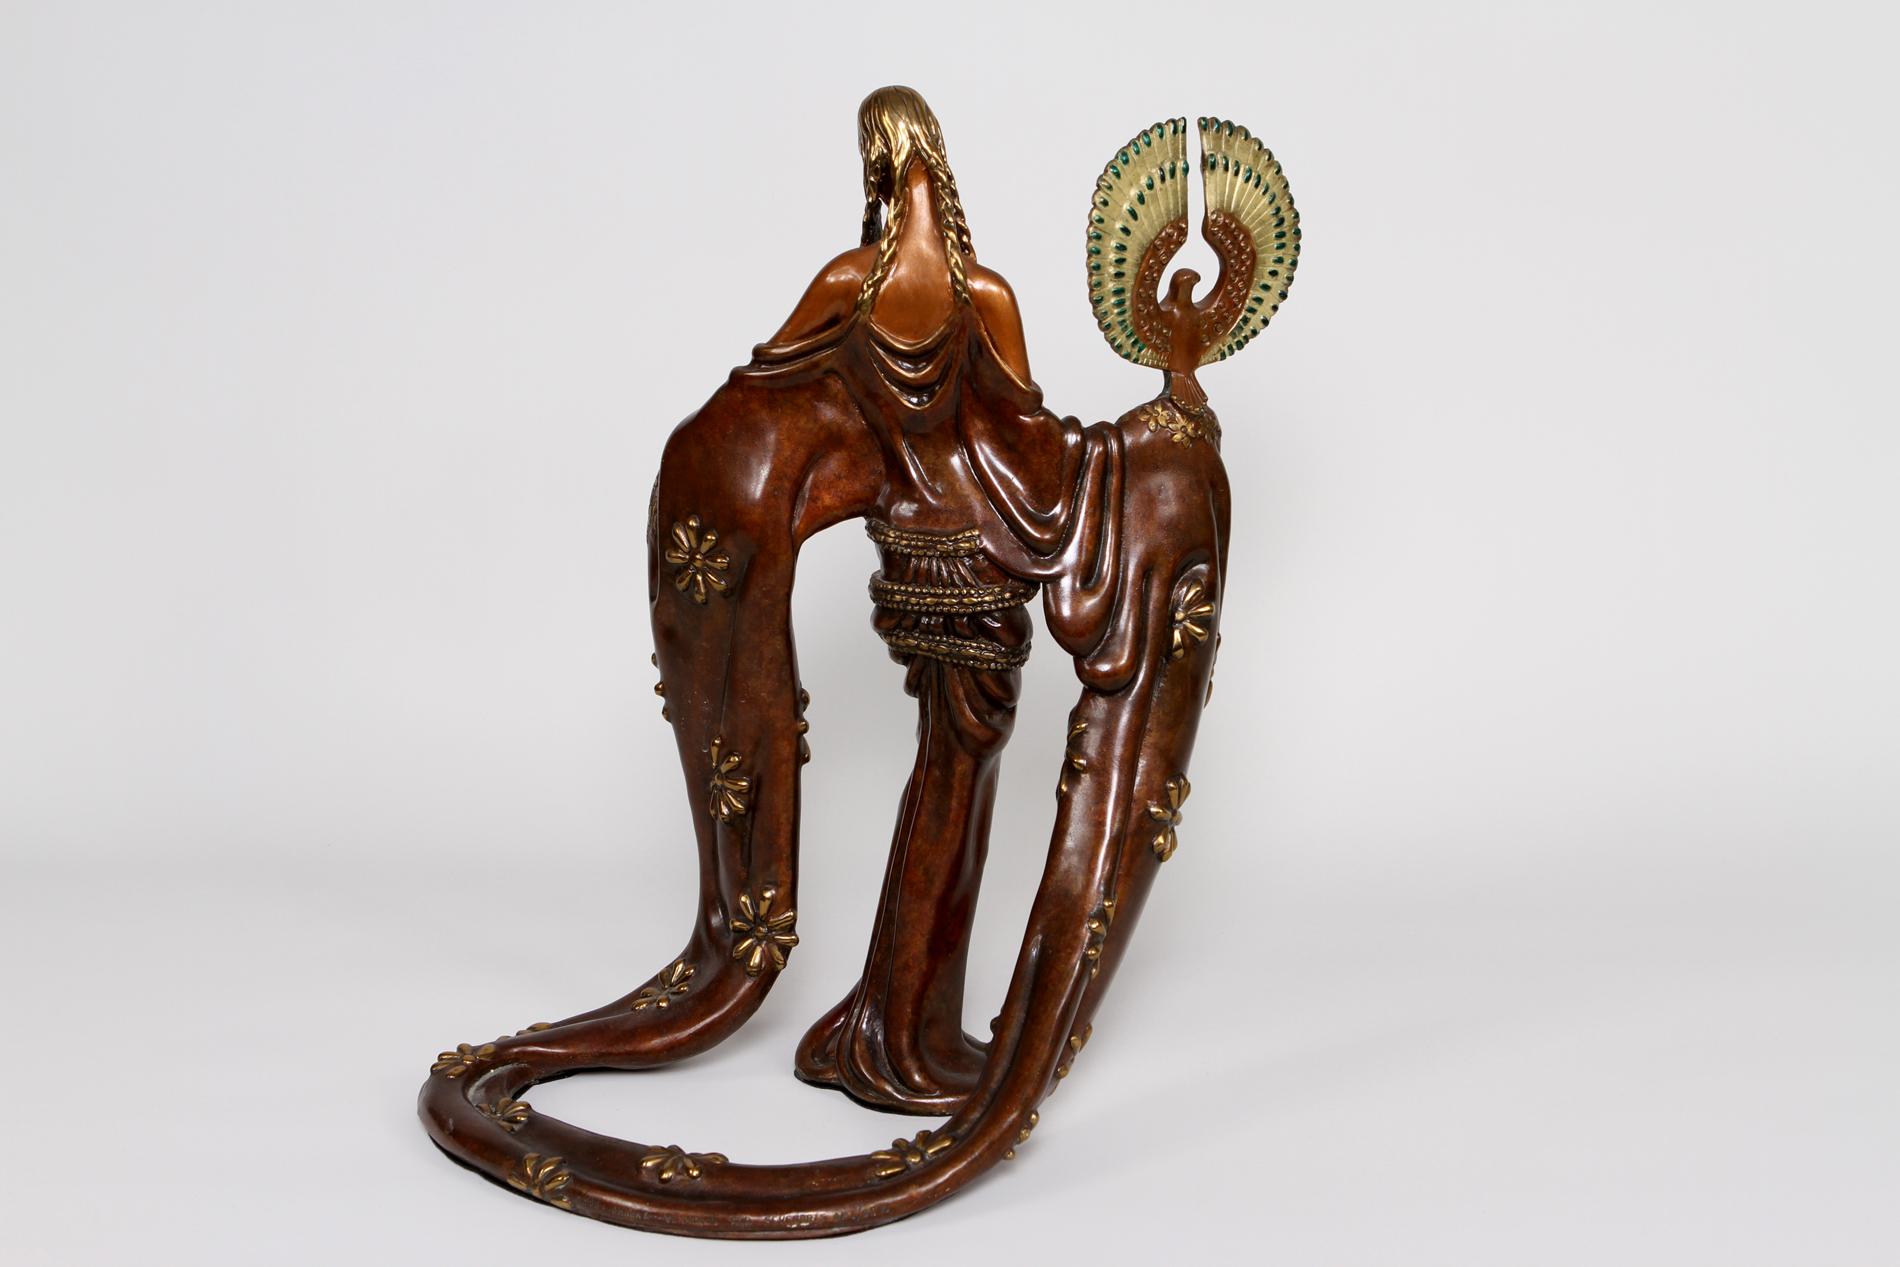 Beautiful sculpture of a woman in polychrome bronze entitled 